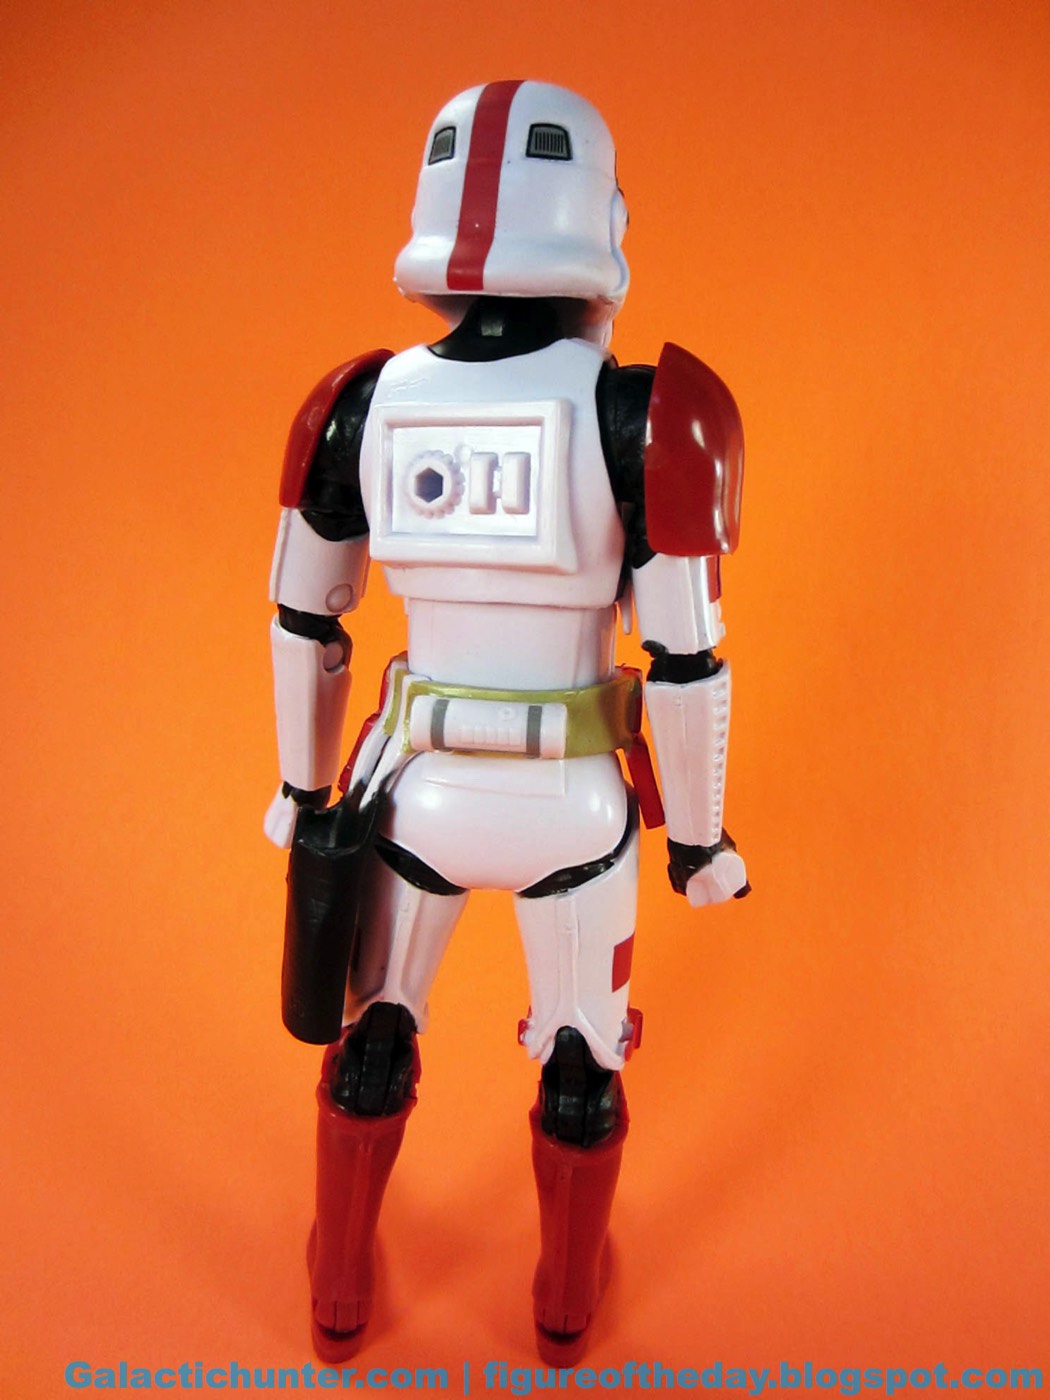 Hasbro Imperial Shock Trooper 6 inch Action Figure B4996 for sale online 